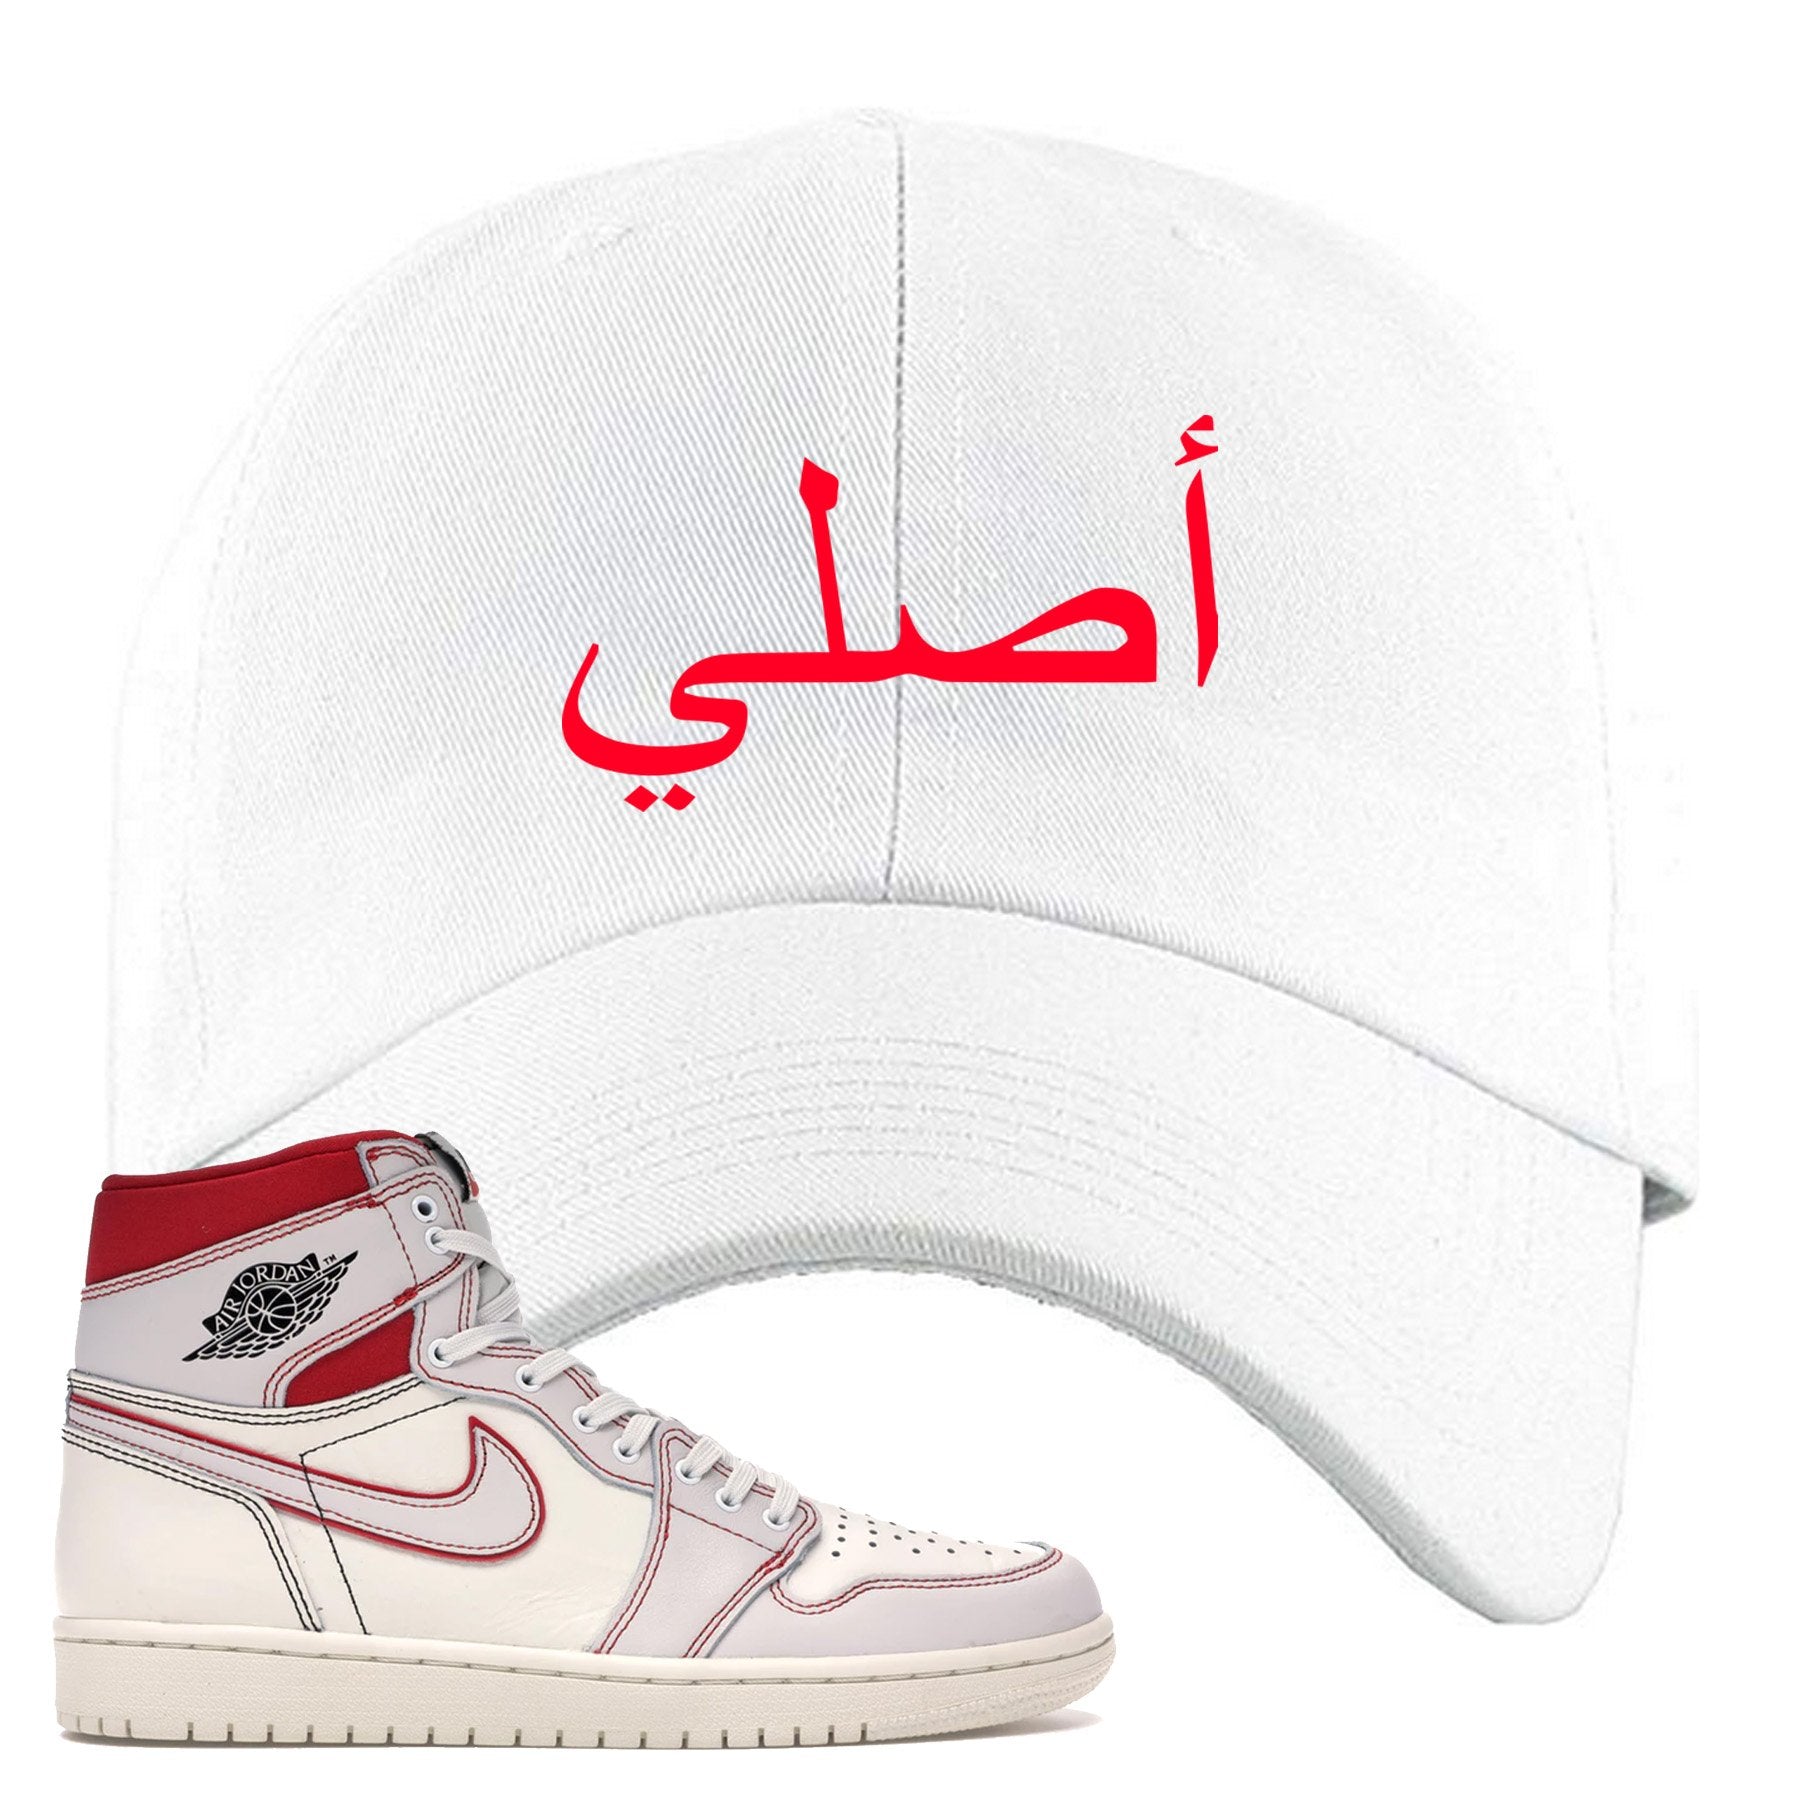 White and red dad hat that matches the Jordan 1 High Retro shoe